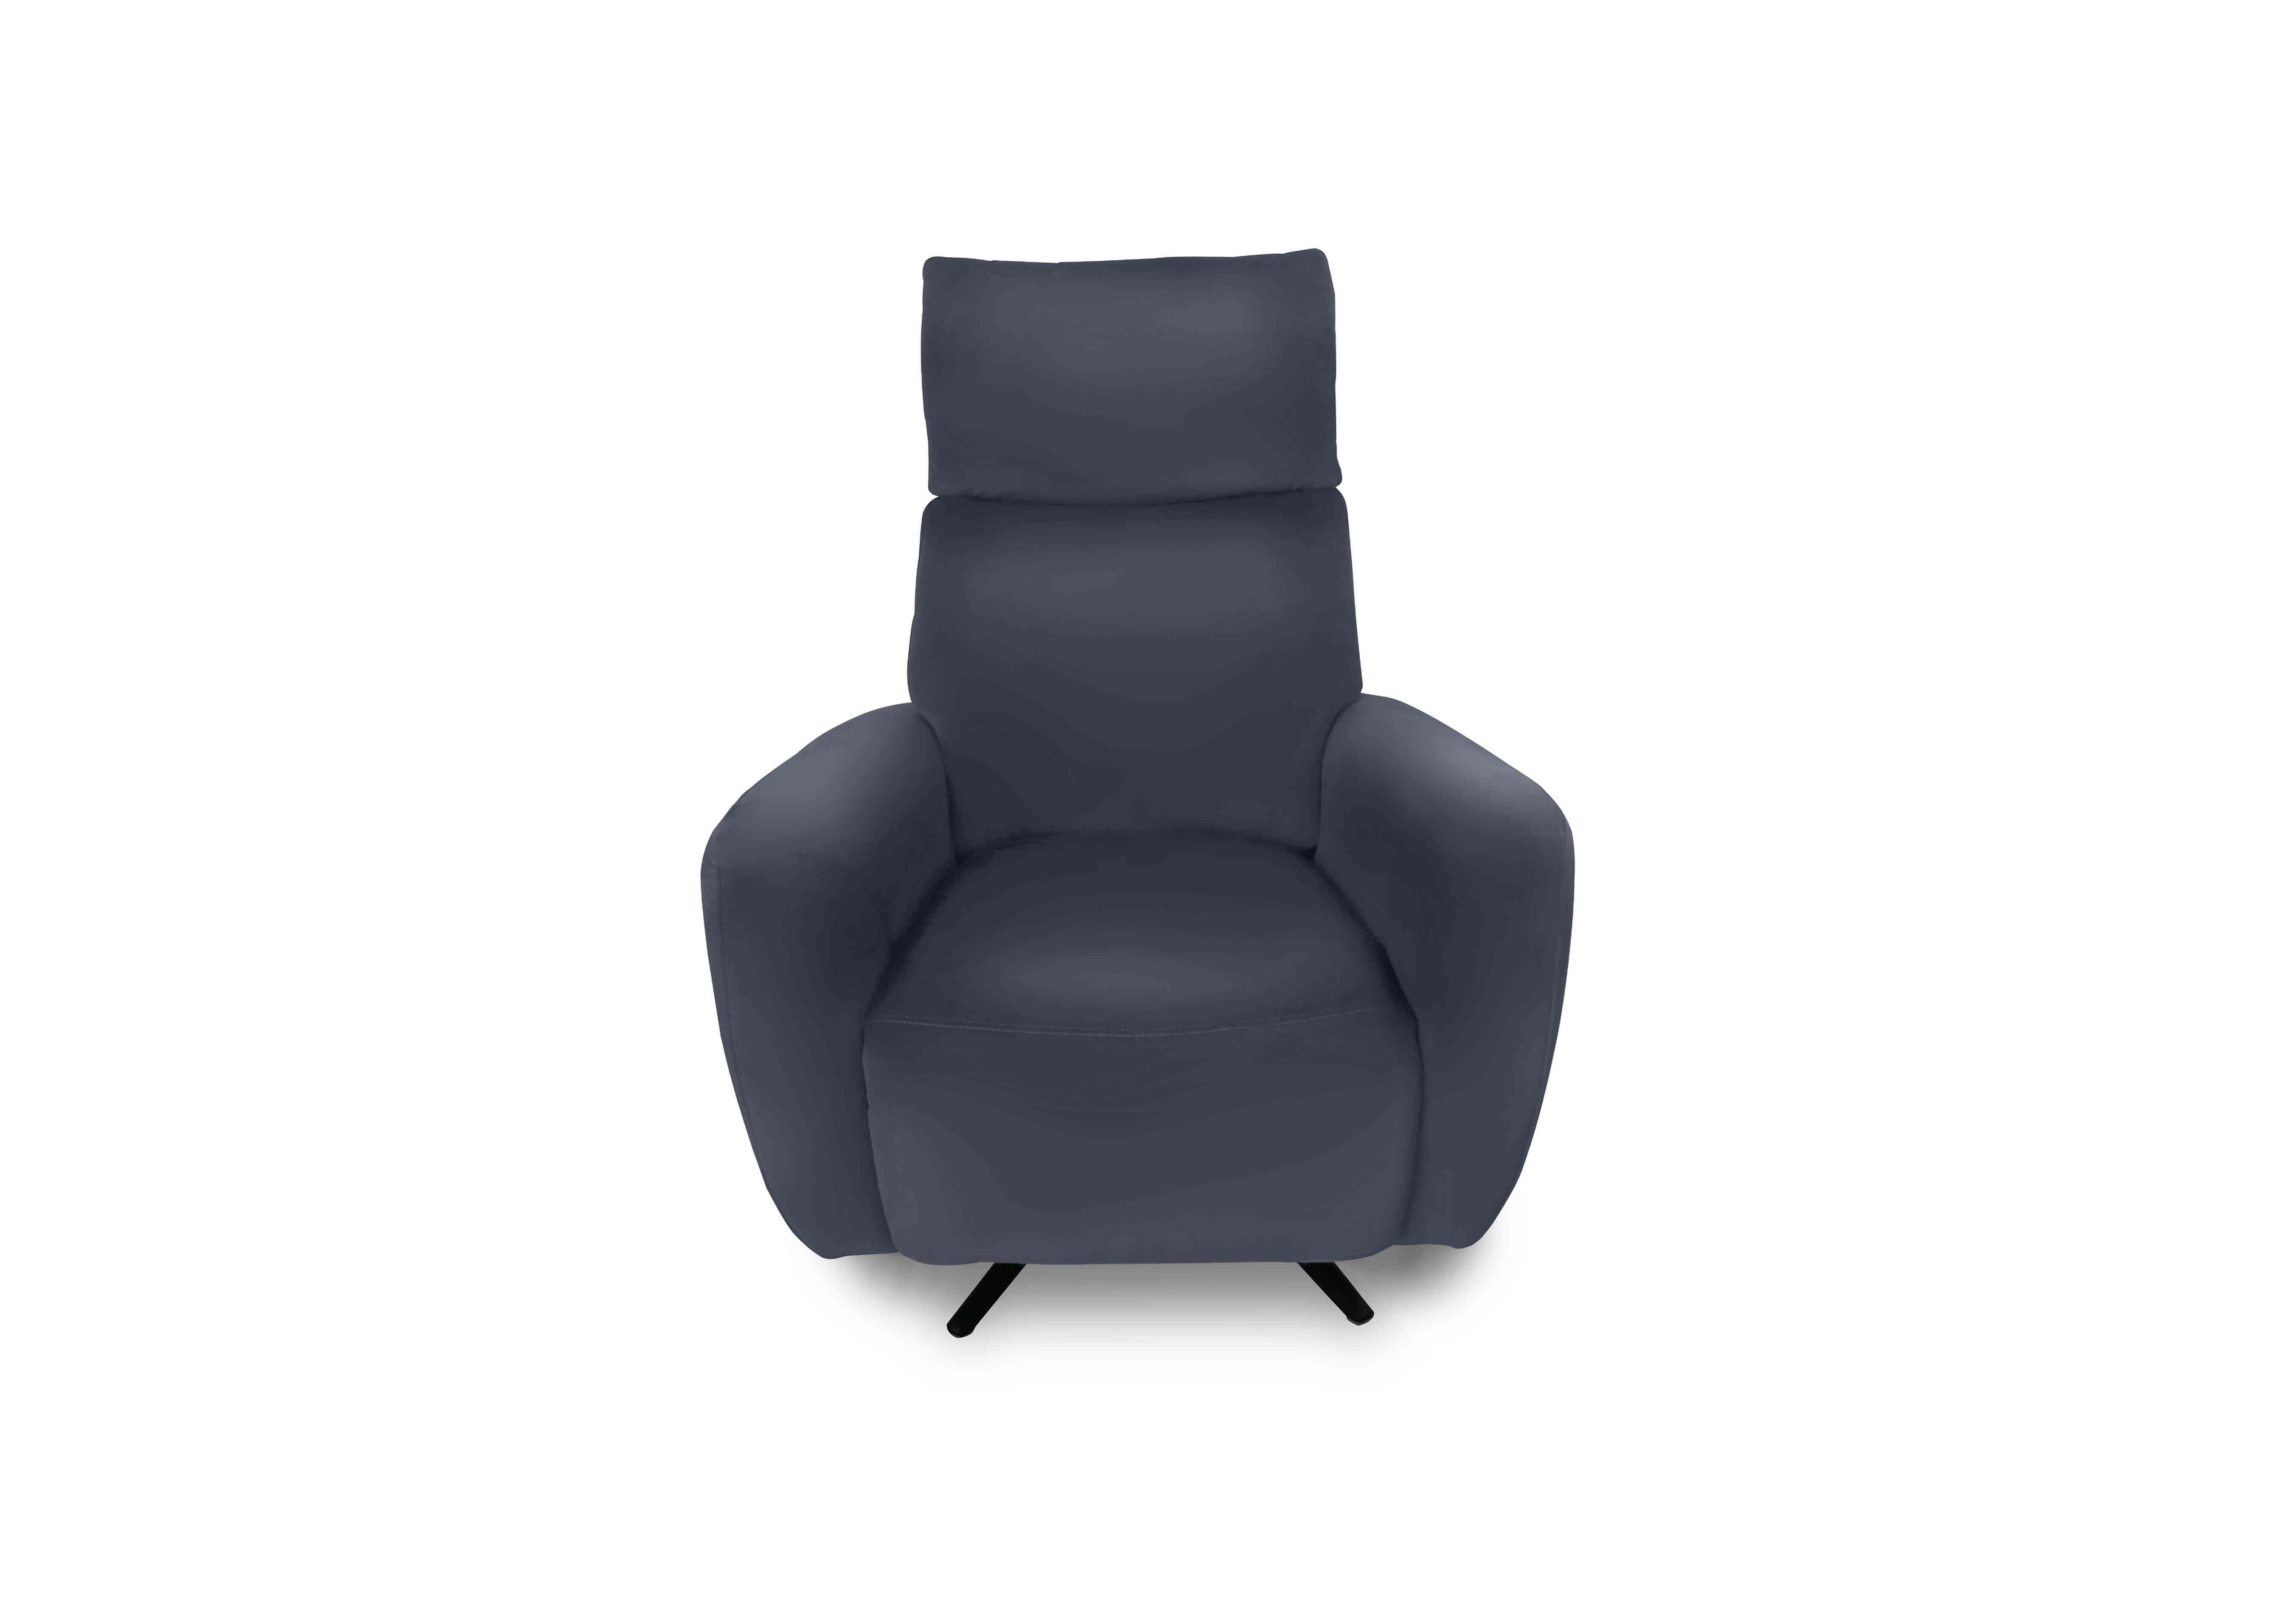 Designer Chair Collection Granada Leather Power Recliner Swivel Chair with Massage Feature in Hw-313e Ocean Blue on Furniture Village